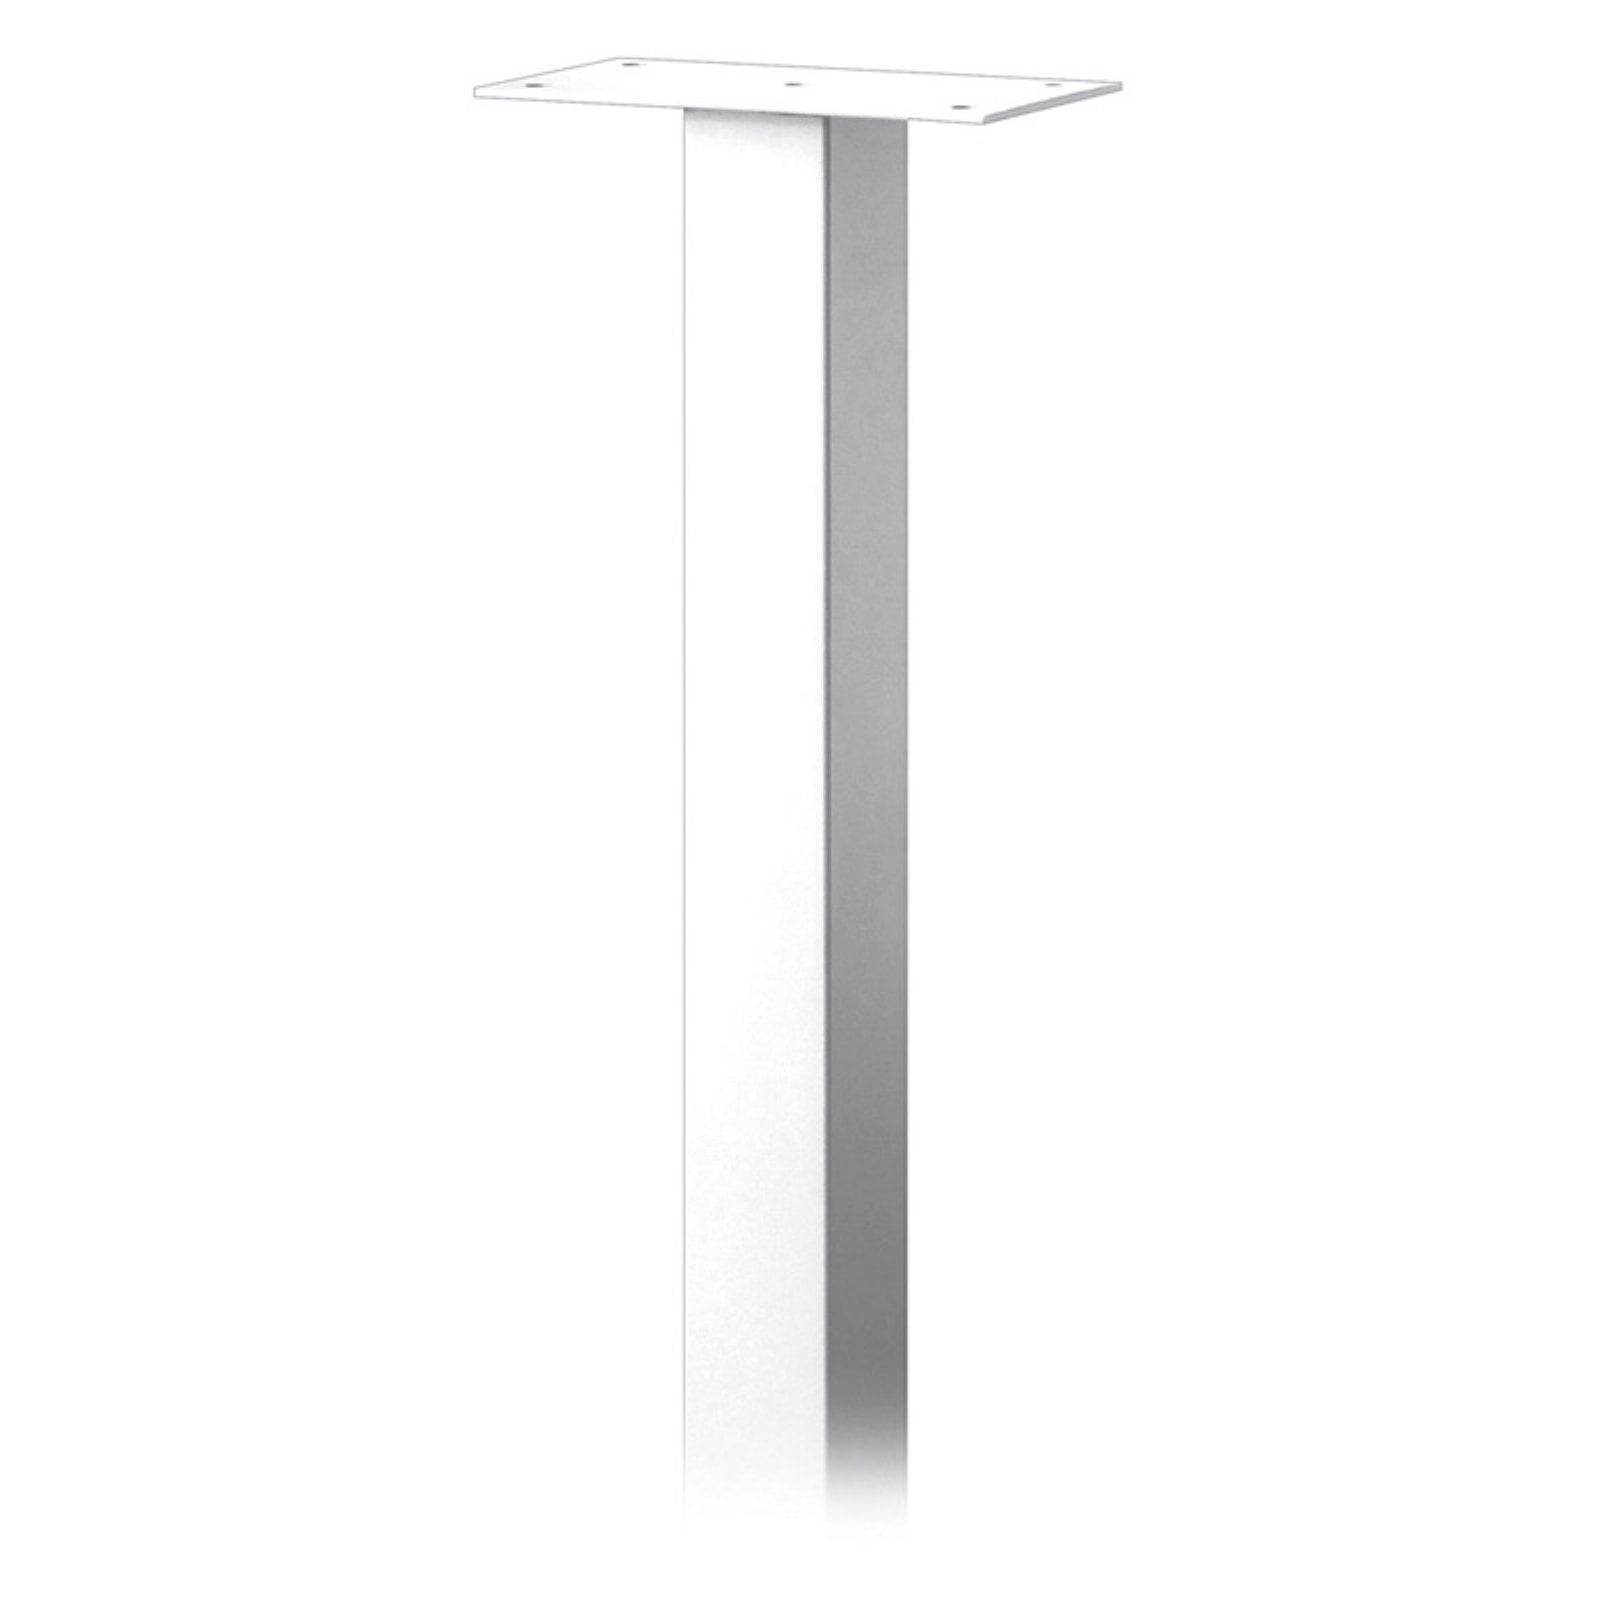 Standard Pedestal - In-Ground Mounted - for Roadside Mailbox, Mail Chest & Mail Package Drop - White